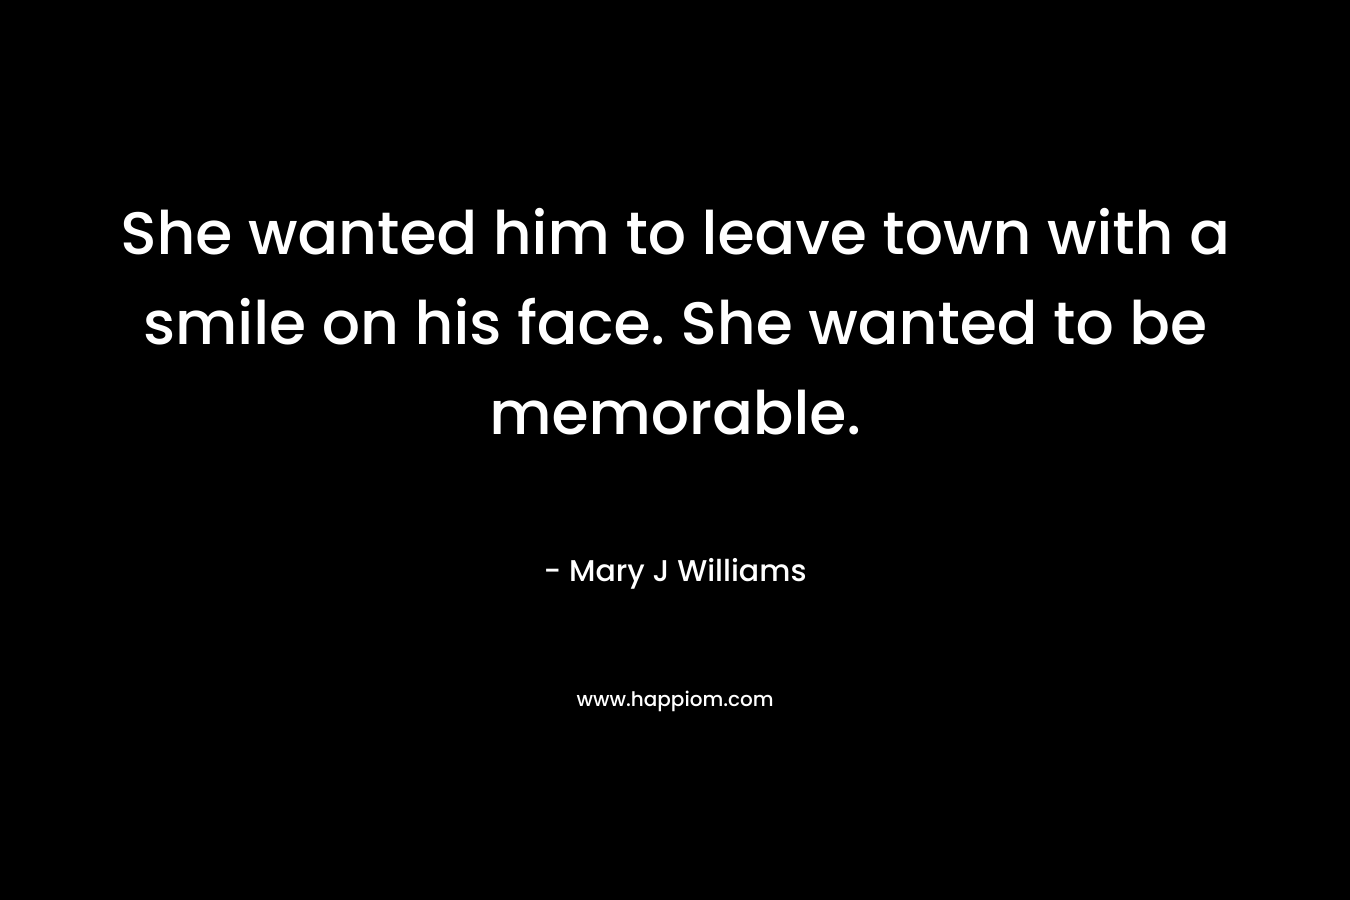 She wanted him to leave town with a smile on his face. She wanted to be memorable.